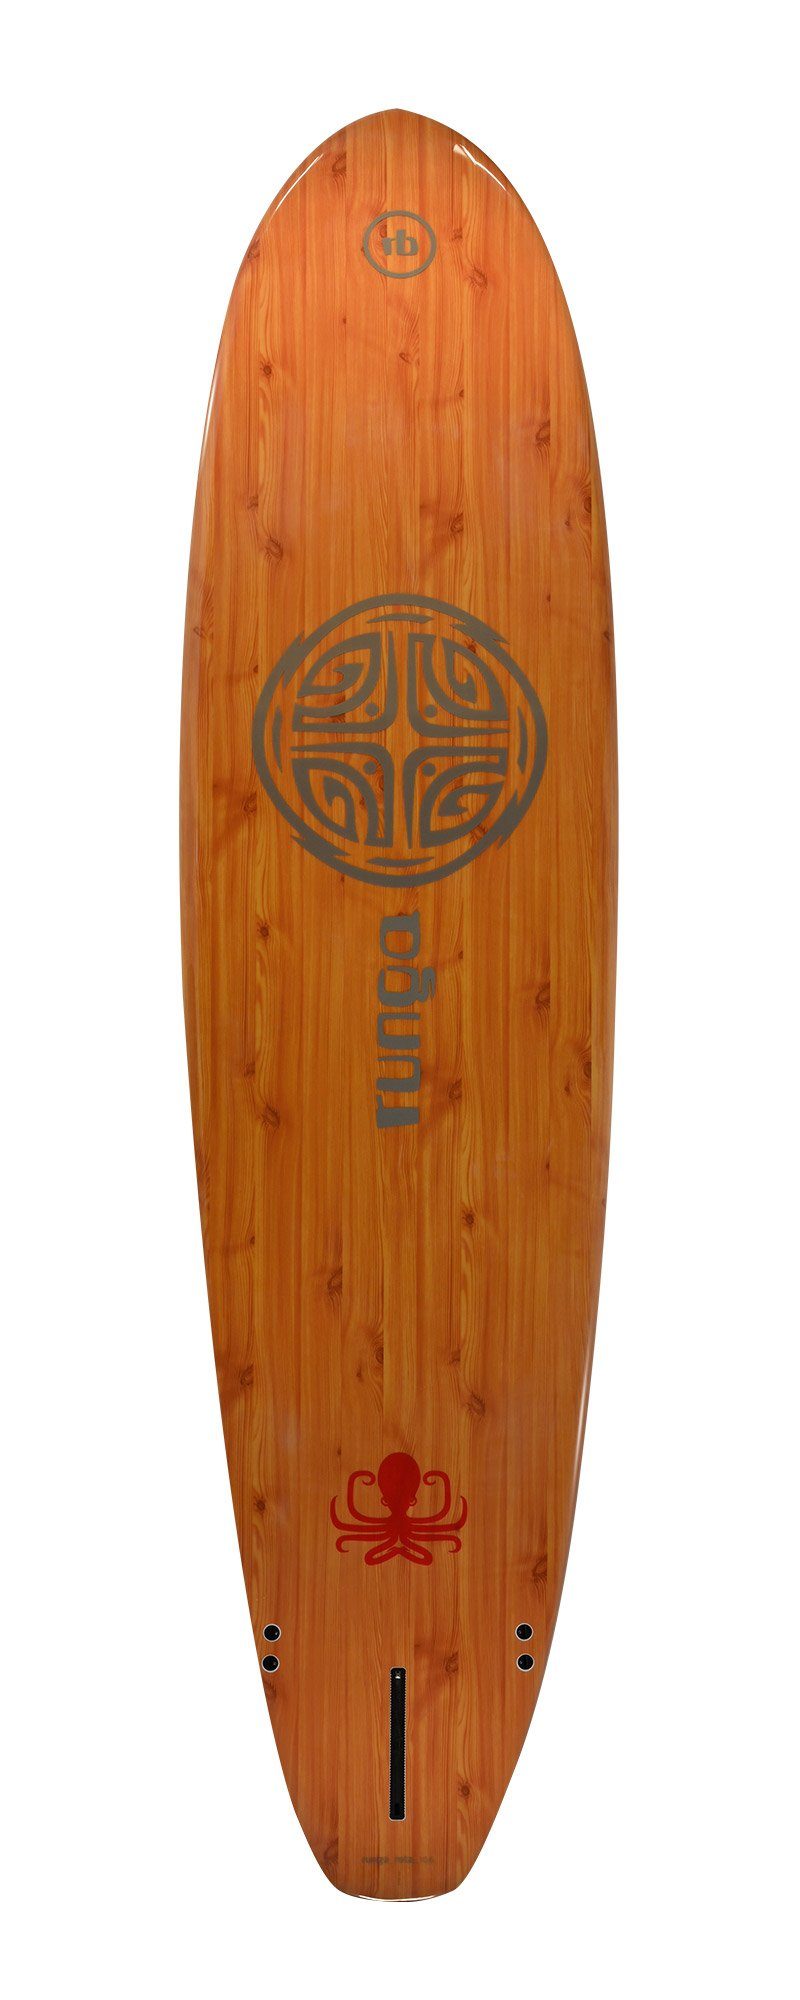 Runga-Boards SUP-Board ROTA Up Board Stand (9.6, Paddling 3-tlg. RED Allrounder, Inkl. SUP, Hard Finnen-Set) coiled & leash